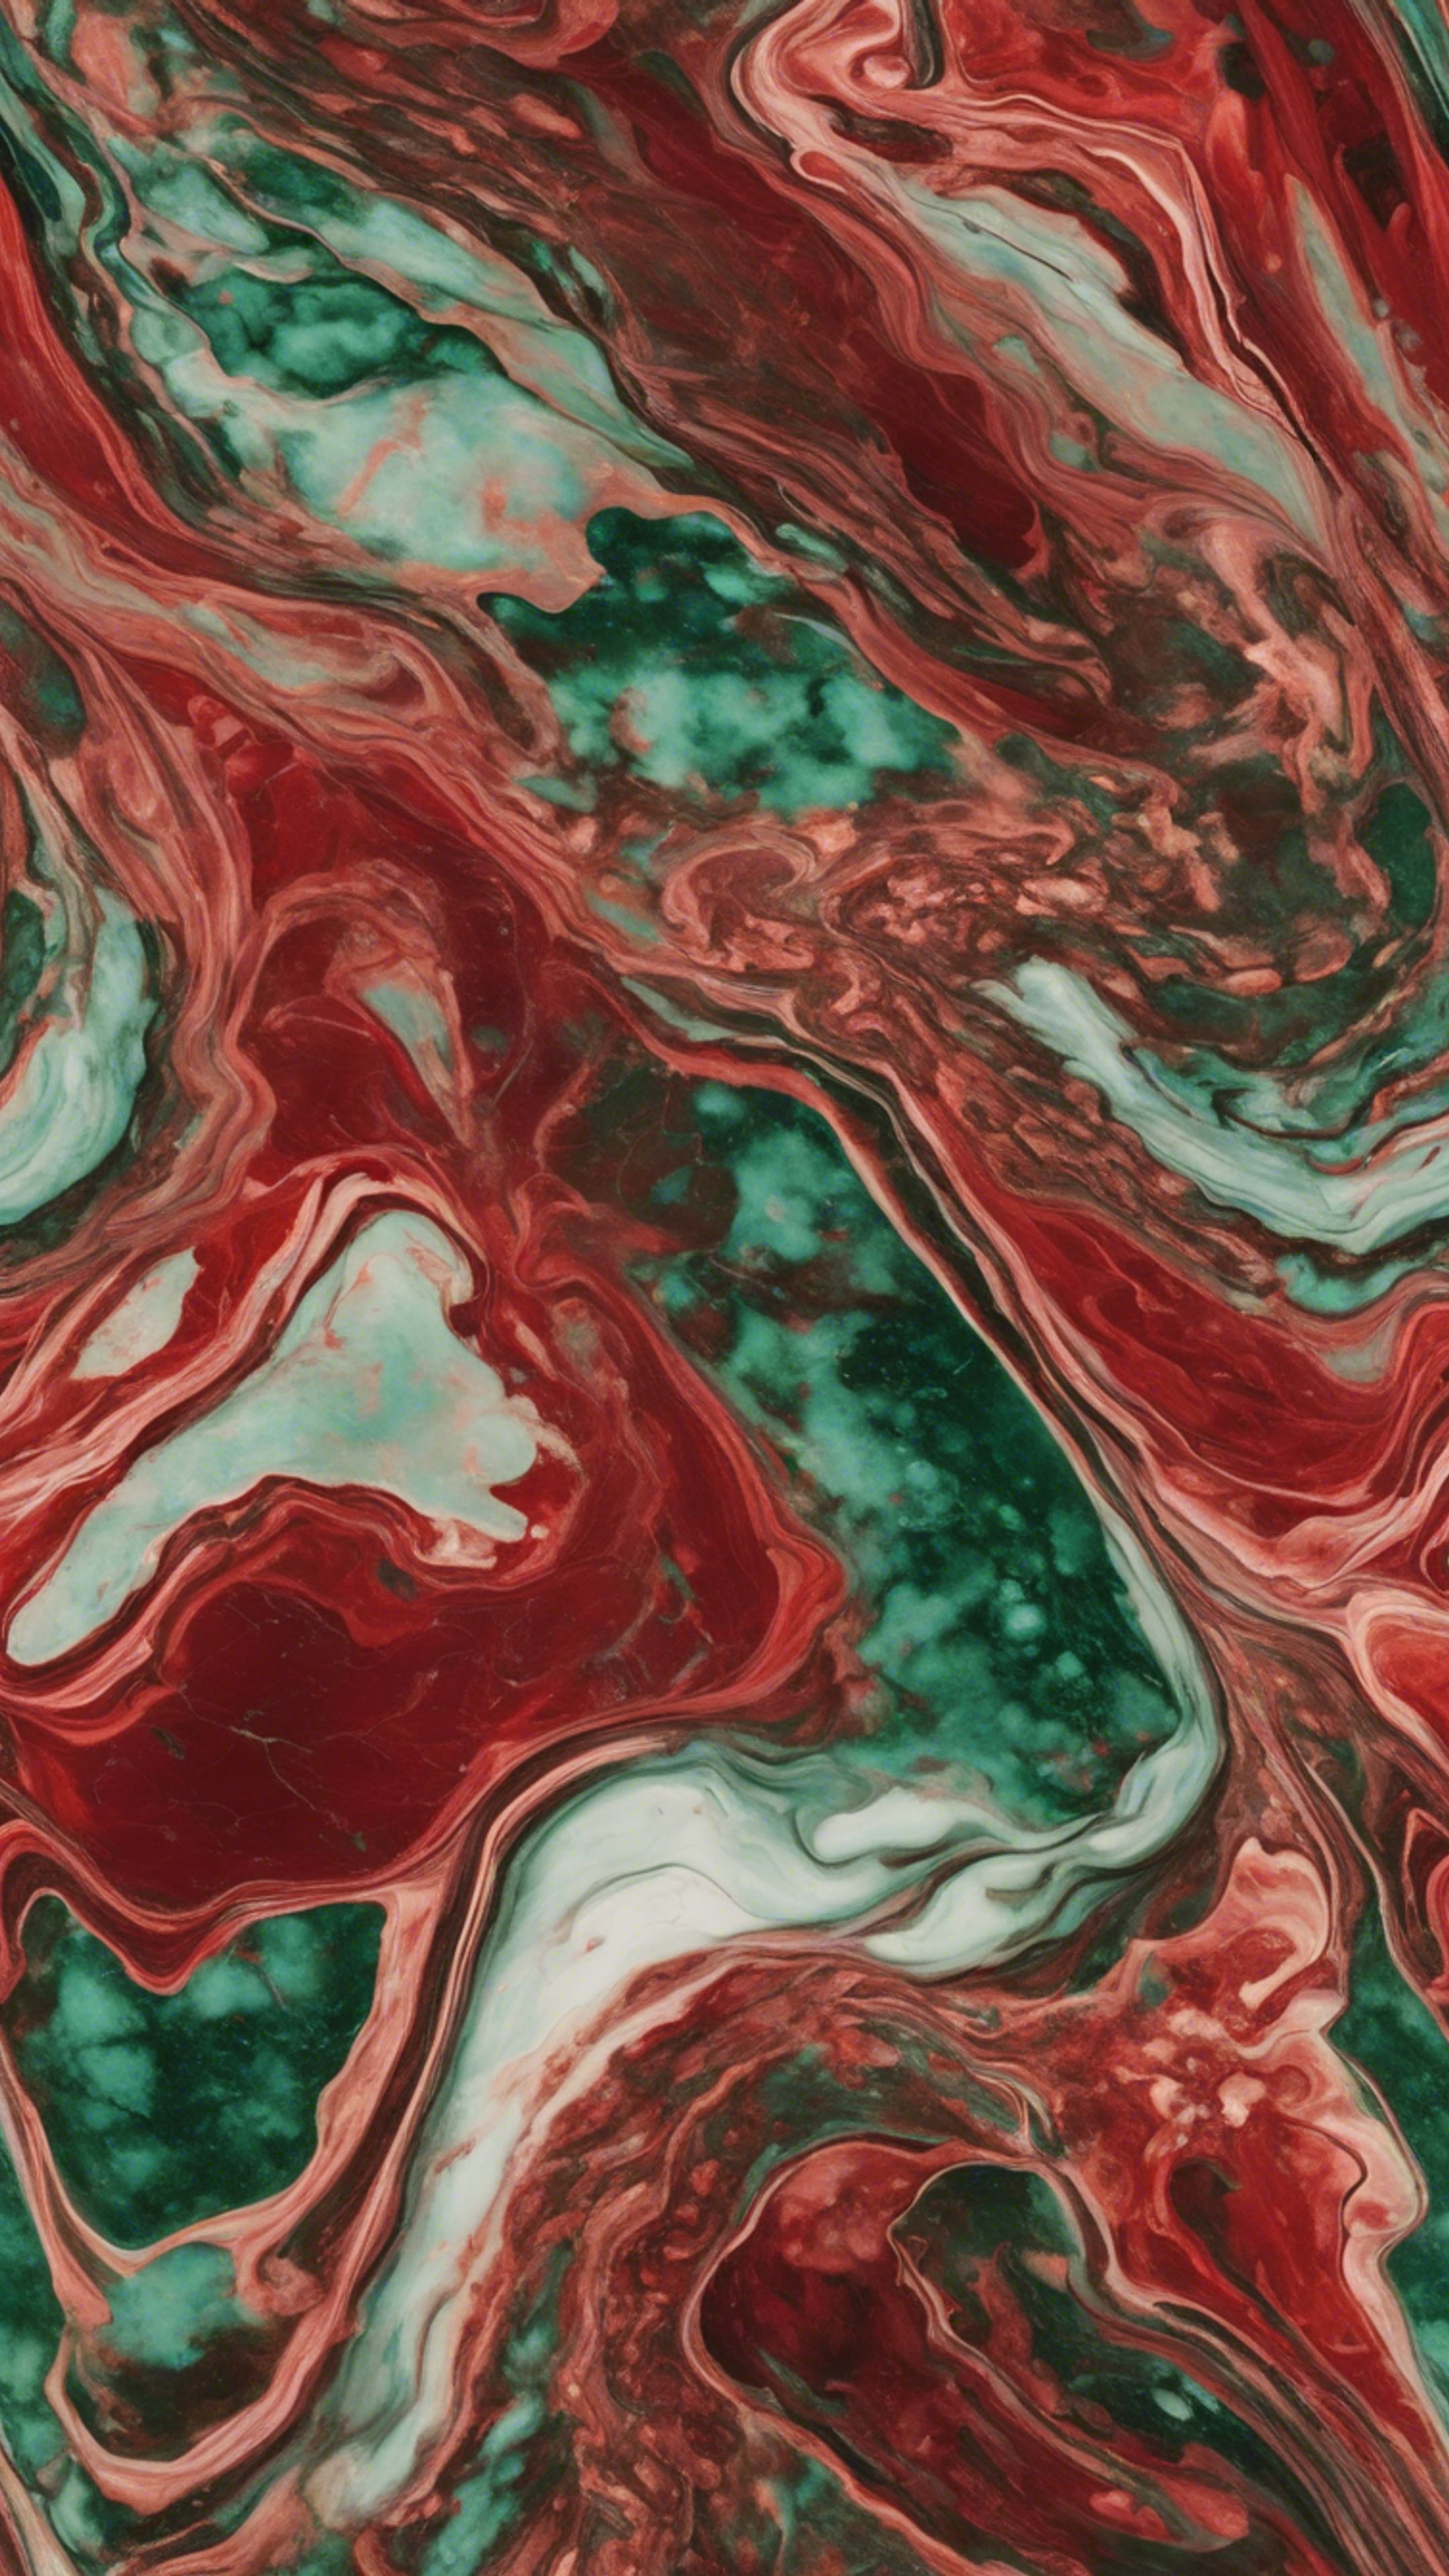 A seamless pattern that reflects an intertwining red and green marble design. ផ្ទាំង​រូបភាព[d1bc3b7ed45643dfad14]